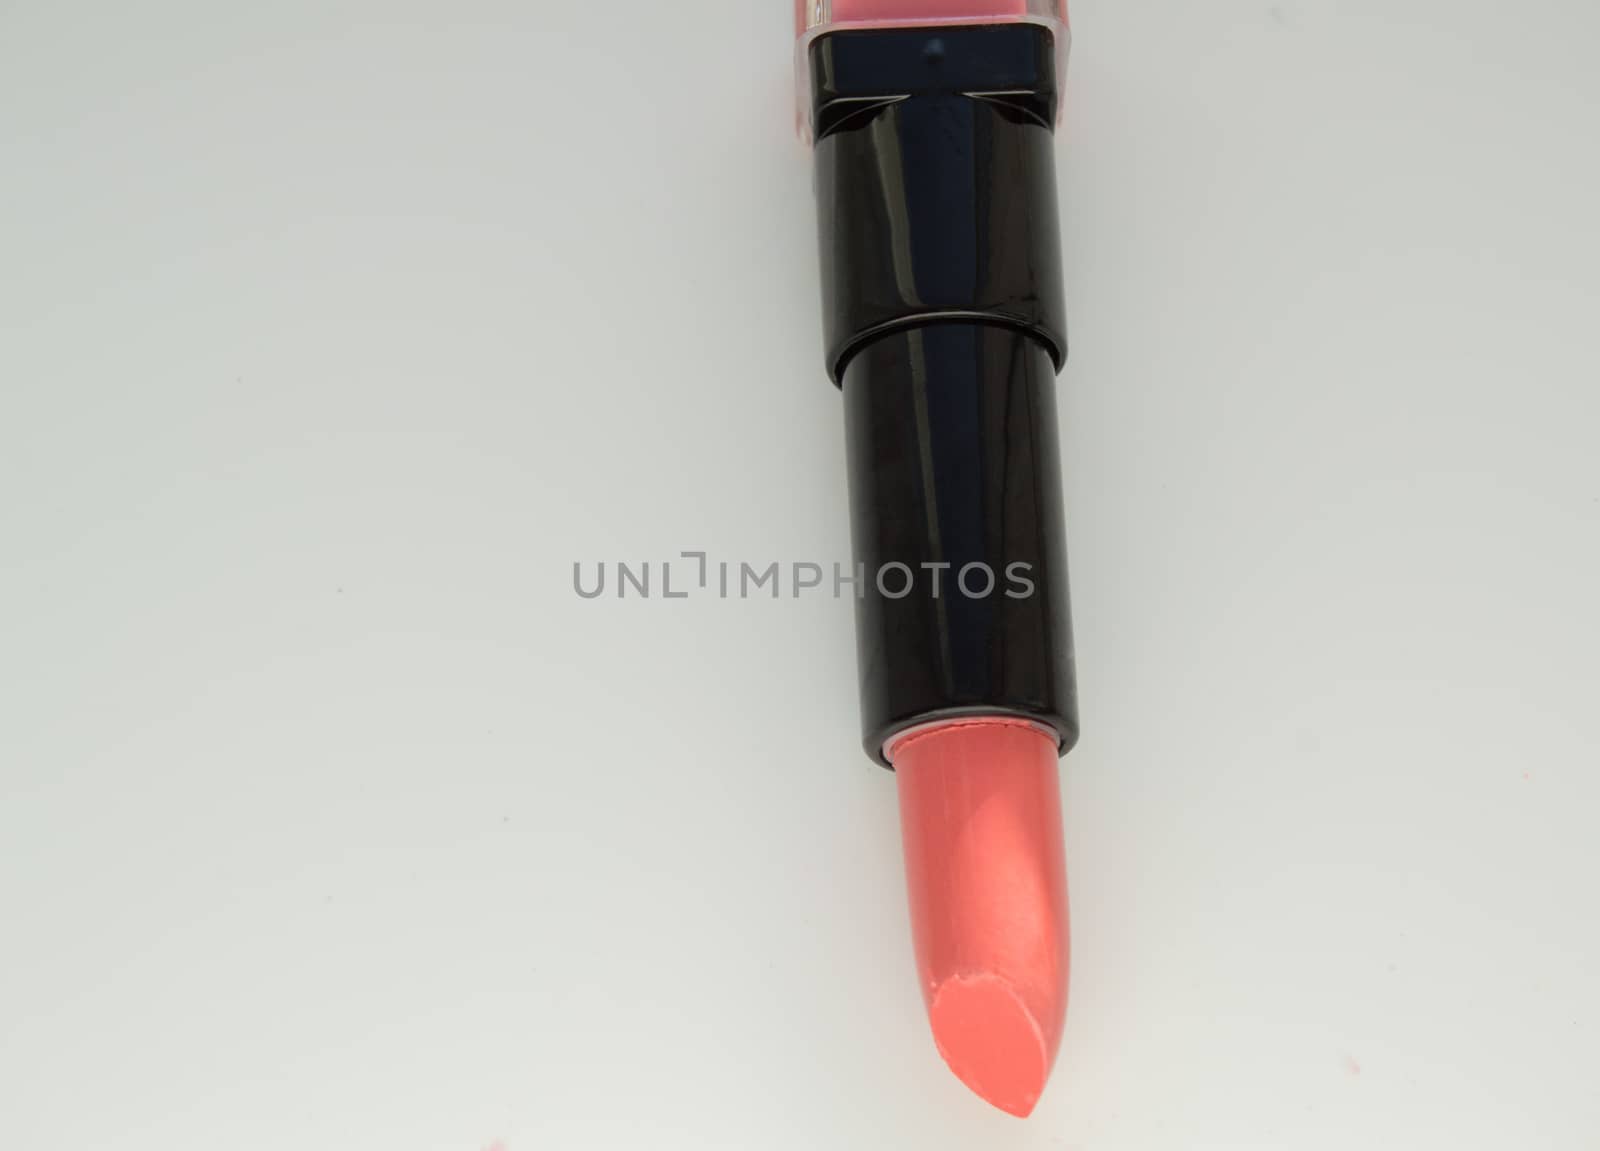 Pink lipstick, open the tube on a white background.